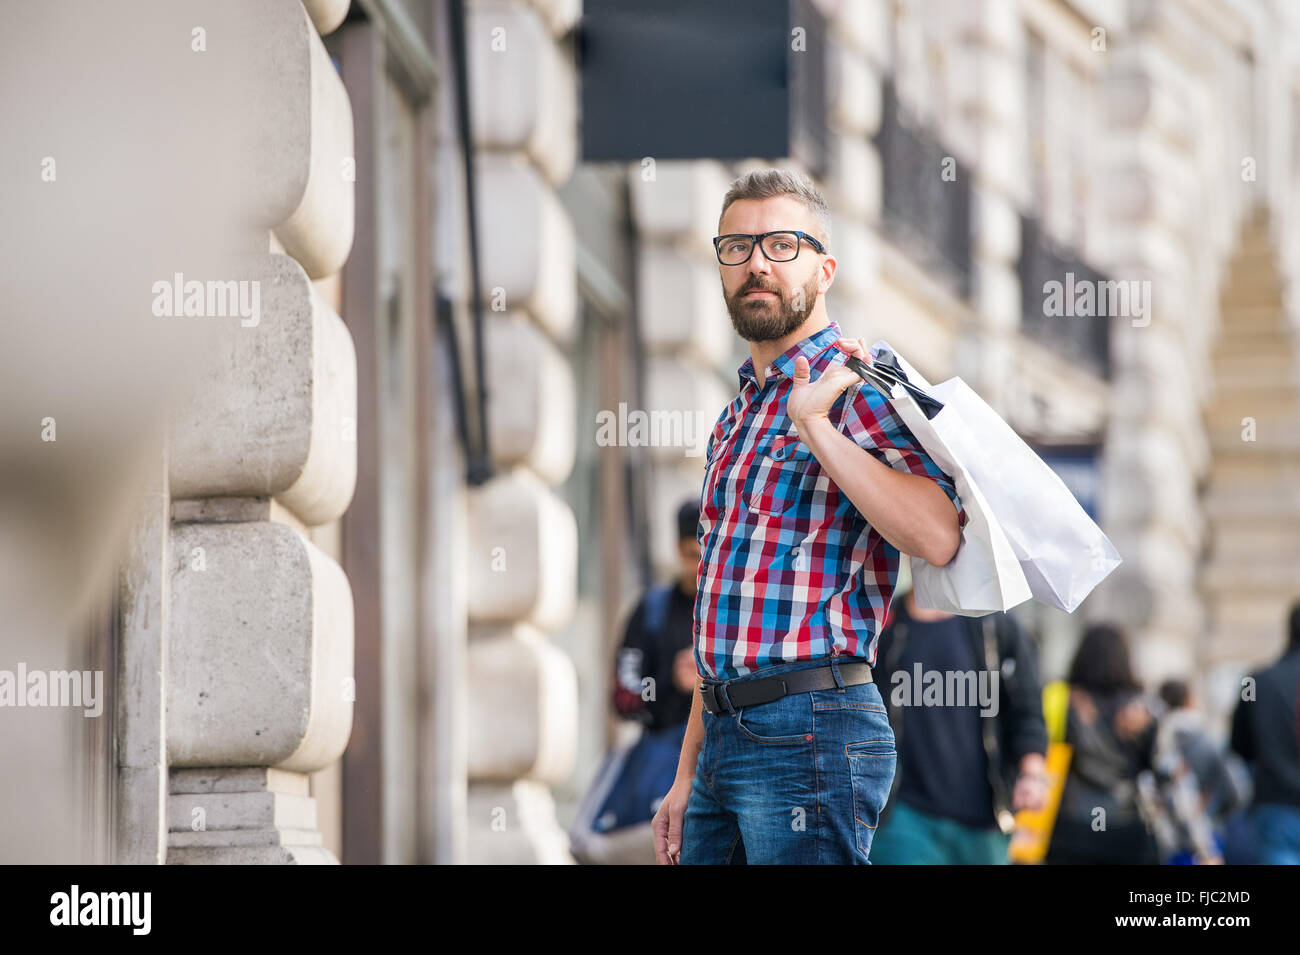 Hipster man shopping in the streets of London Stock Photo